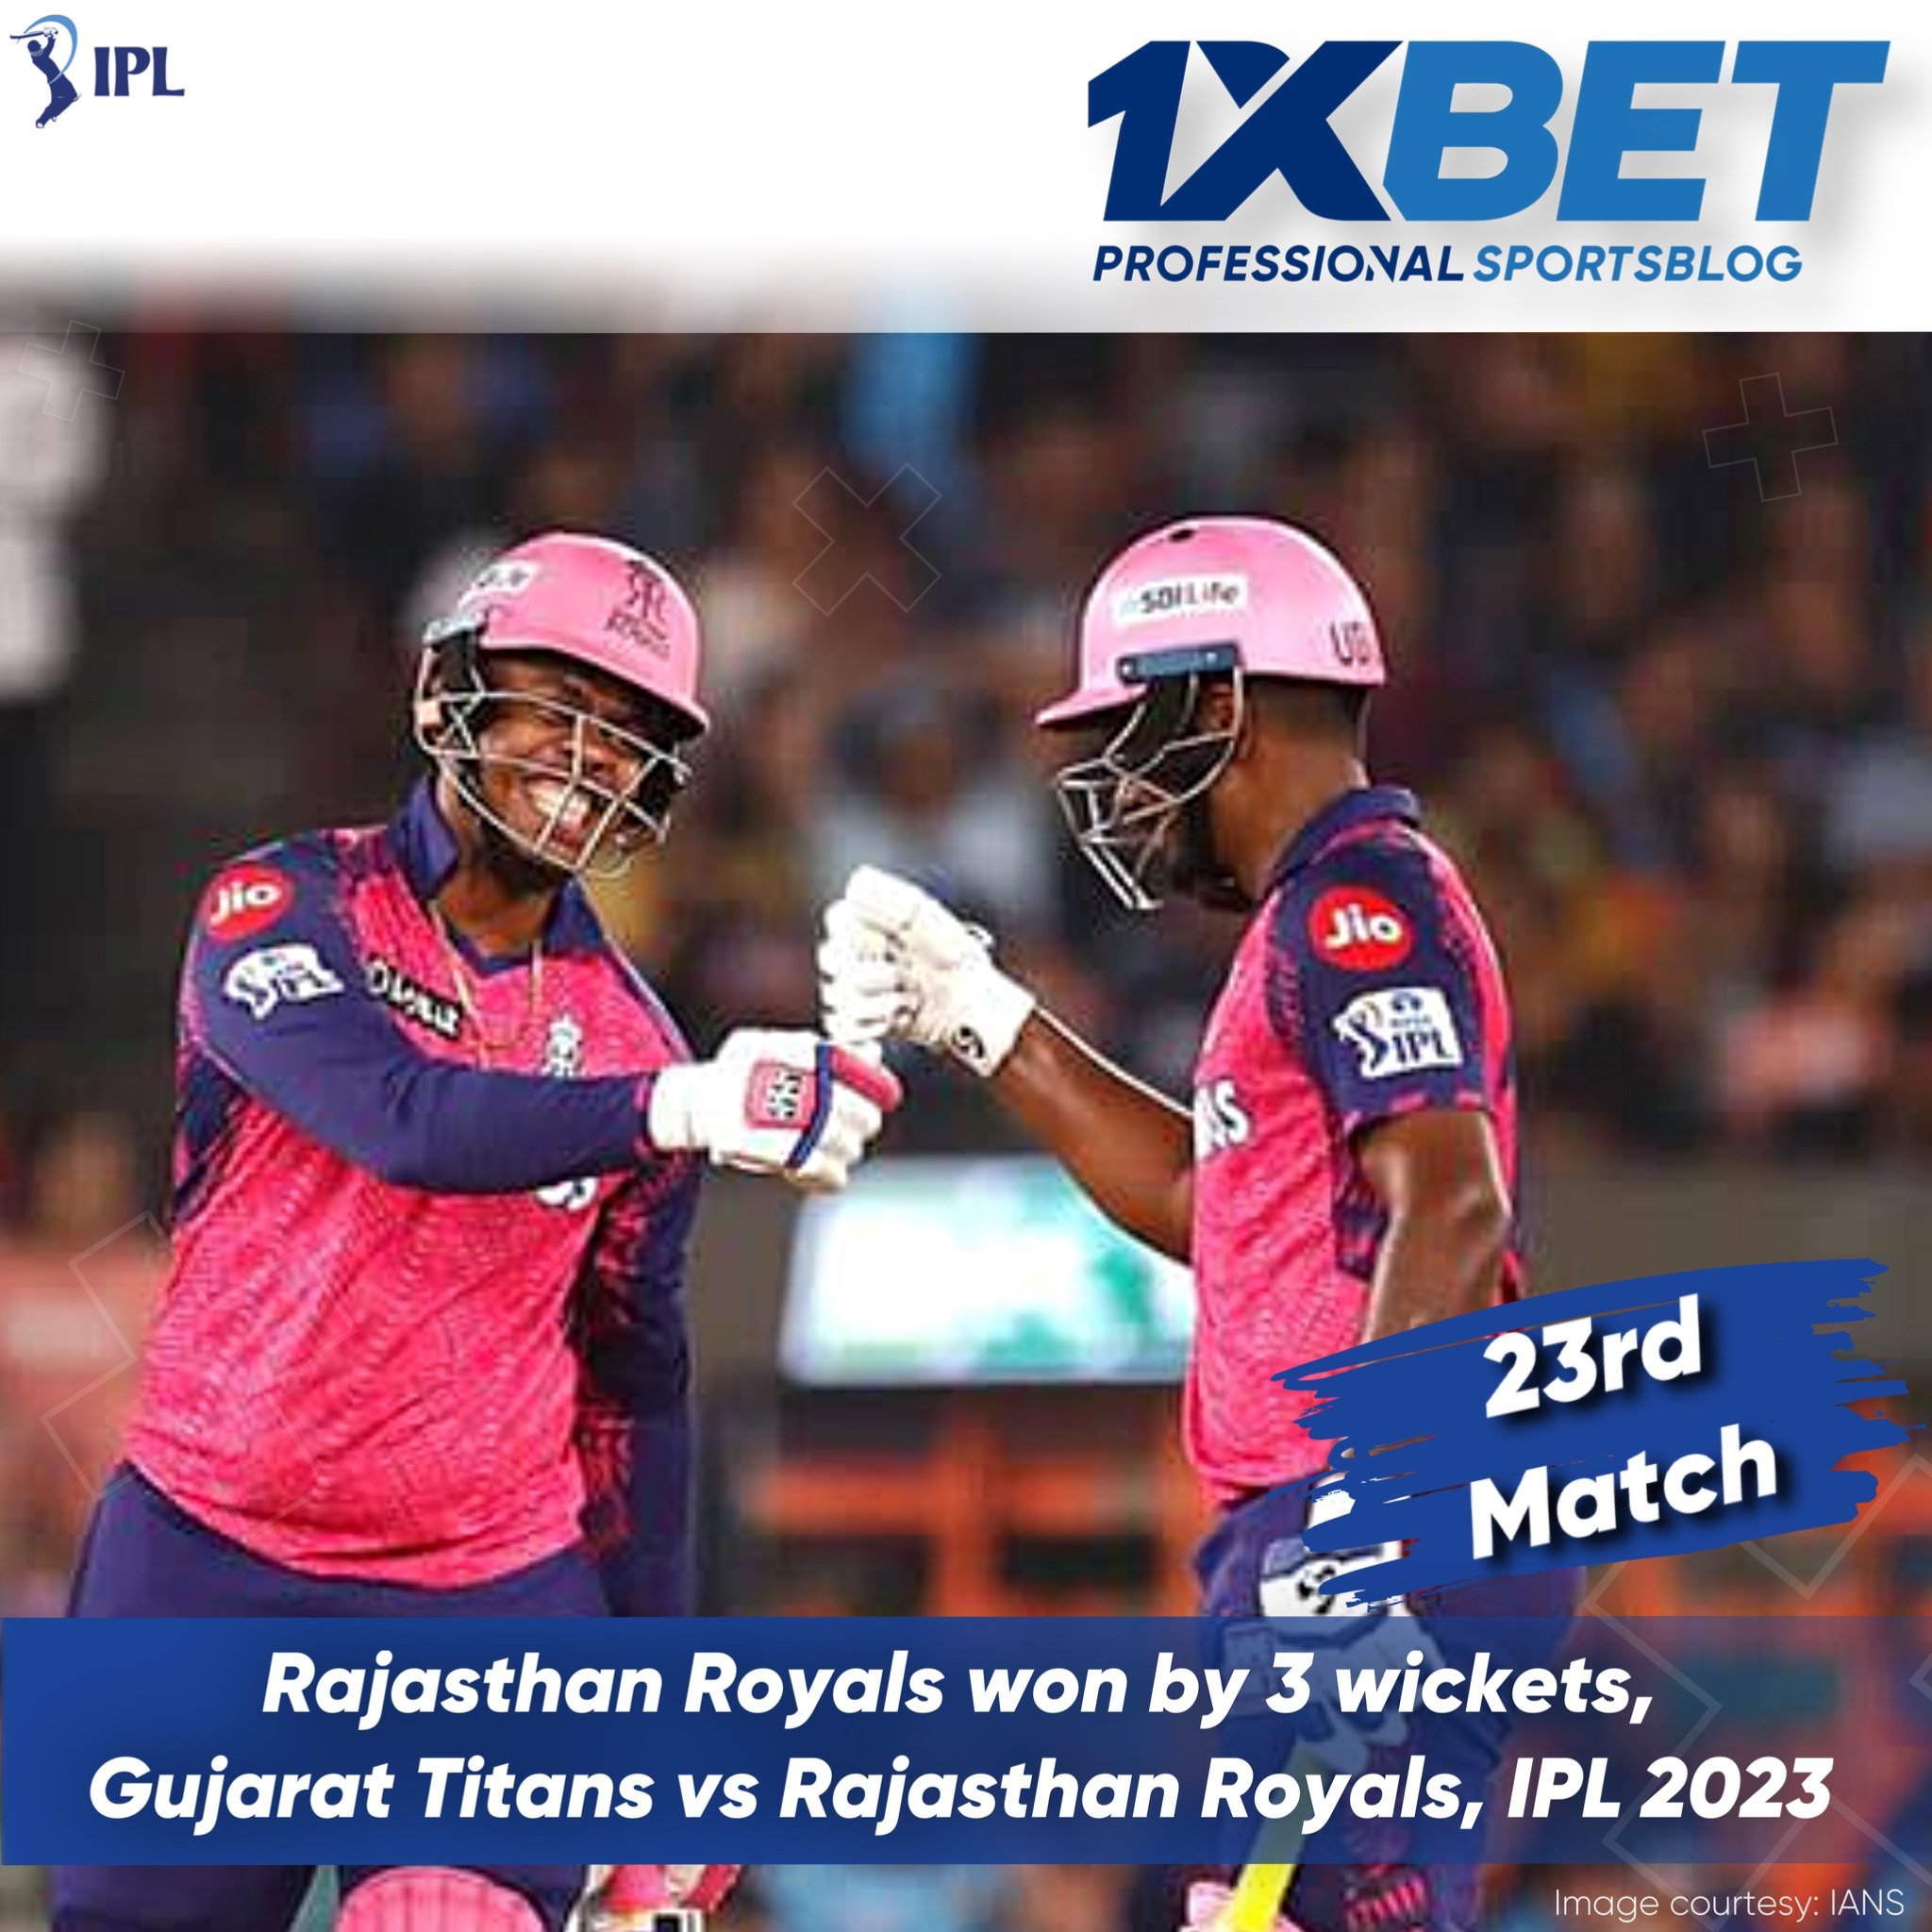 Rajasthan Royals won by 3 wickets